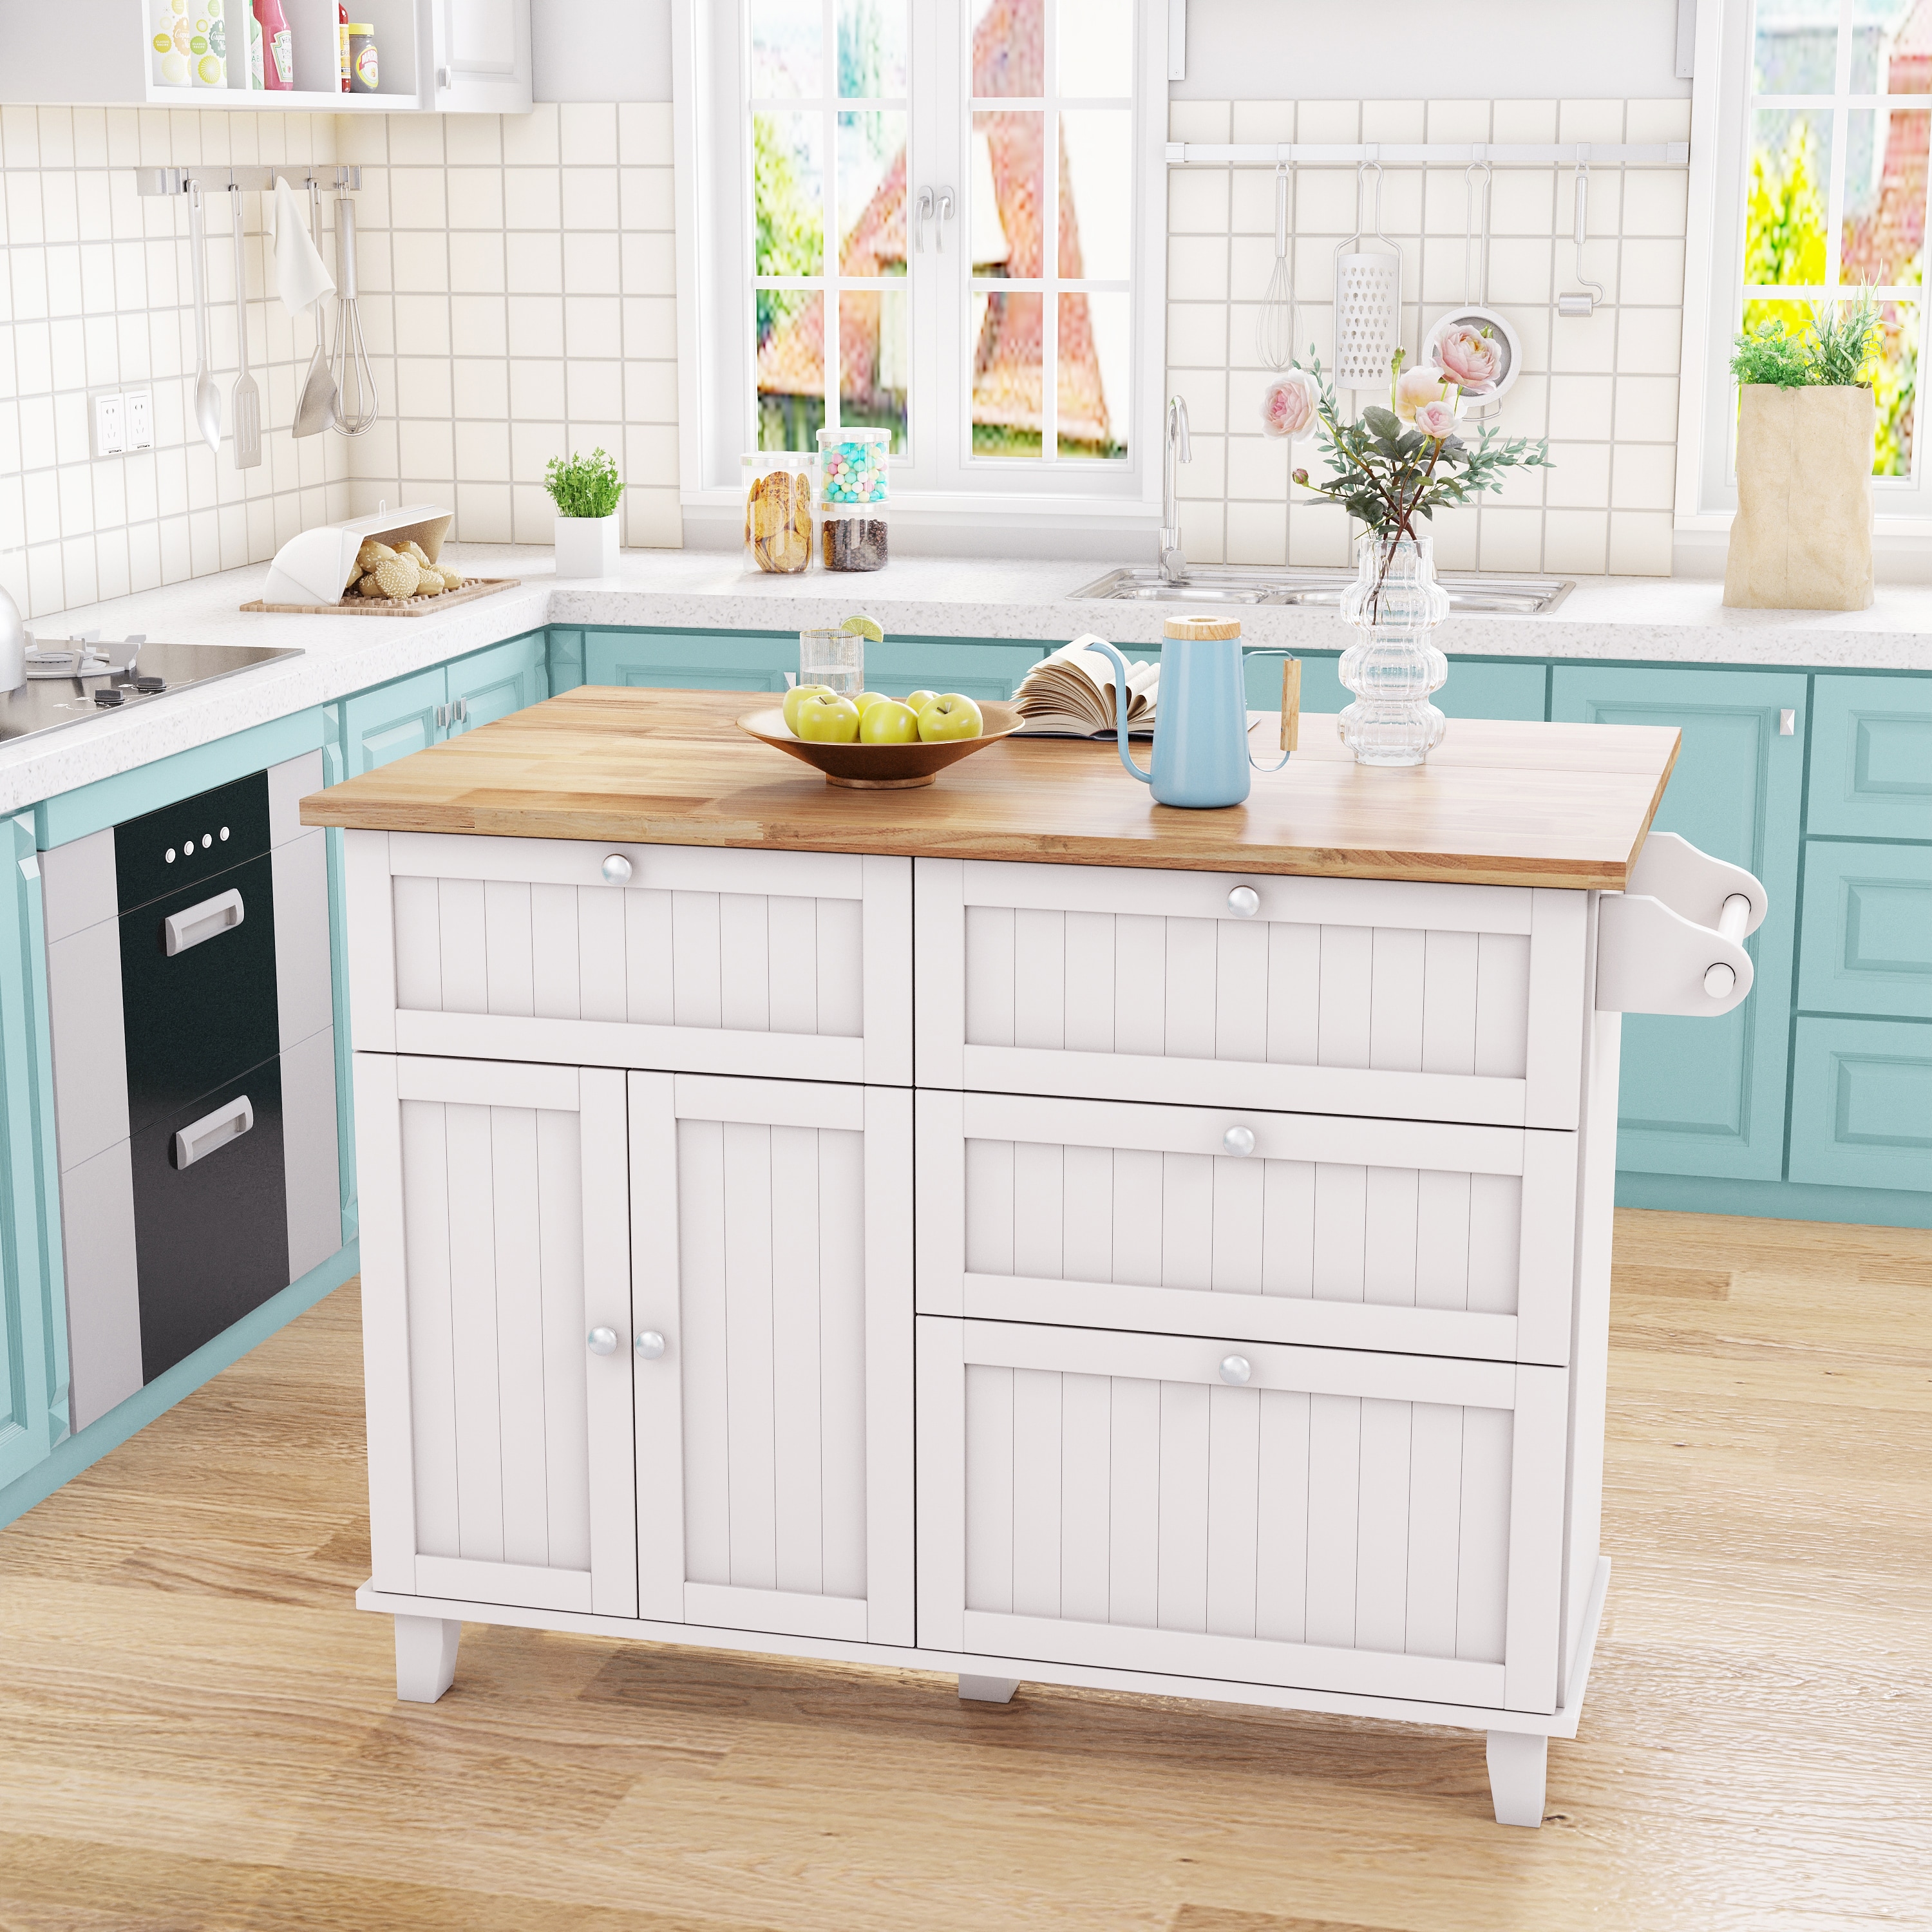 https://ak1.ostkcdn.com/images/products/is/images/direct/ff2b899452b6fad61c5a581a0c86640d46ae9c0a/Kitchen-Island-Set-with-Drop-Leaf-and-2-Seatings%2CDining-Table-Set-with-Storage-Cabinet%2C-Drawers-and-Towel-Rack.jpg